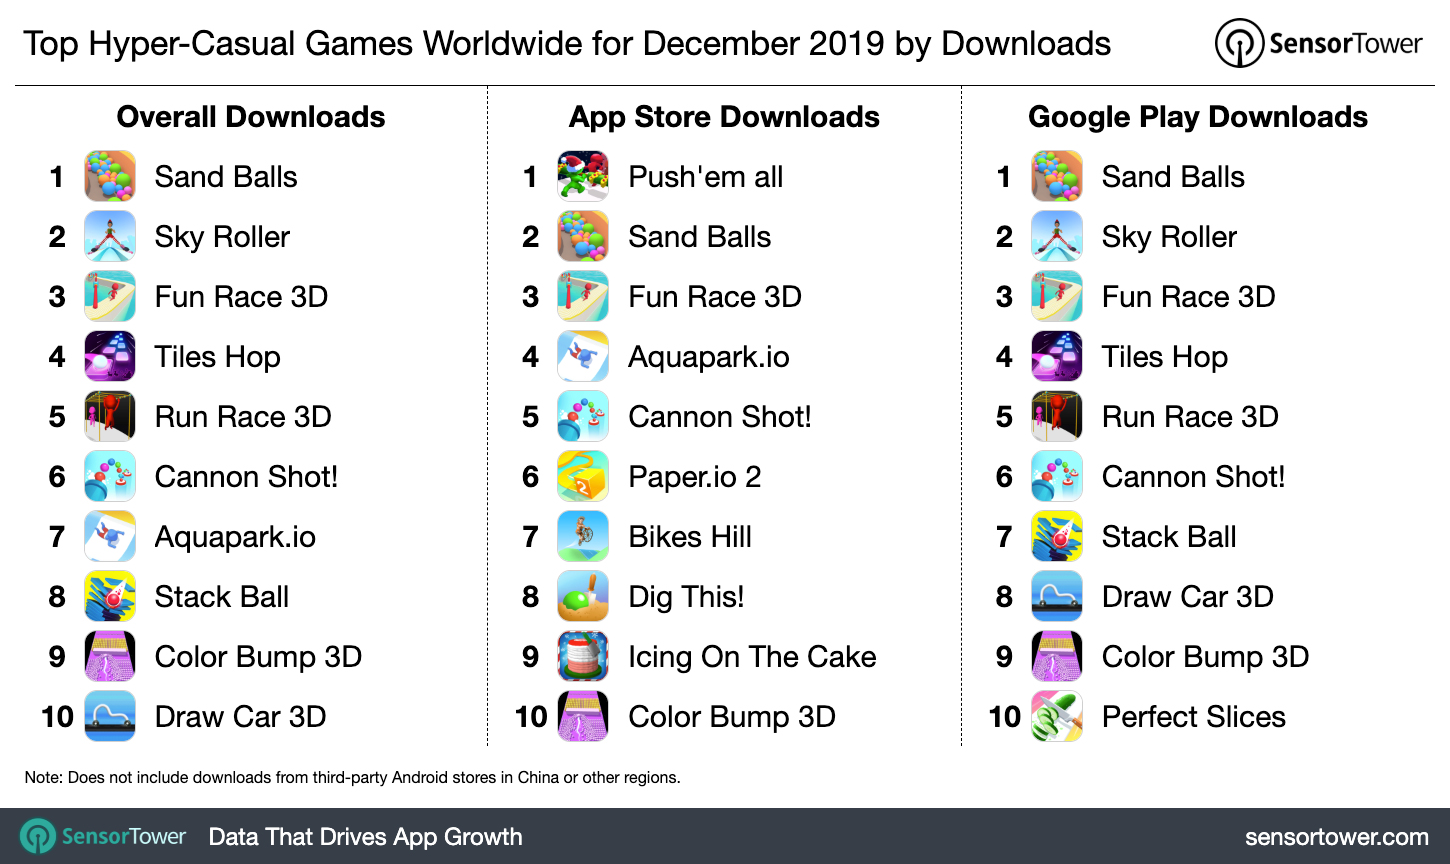 Top Hyper-Casual Games Worldwide for December 2019 by Downloads